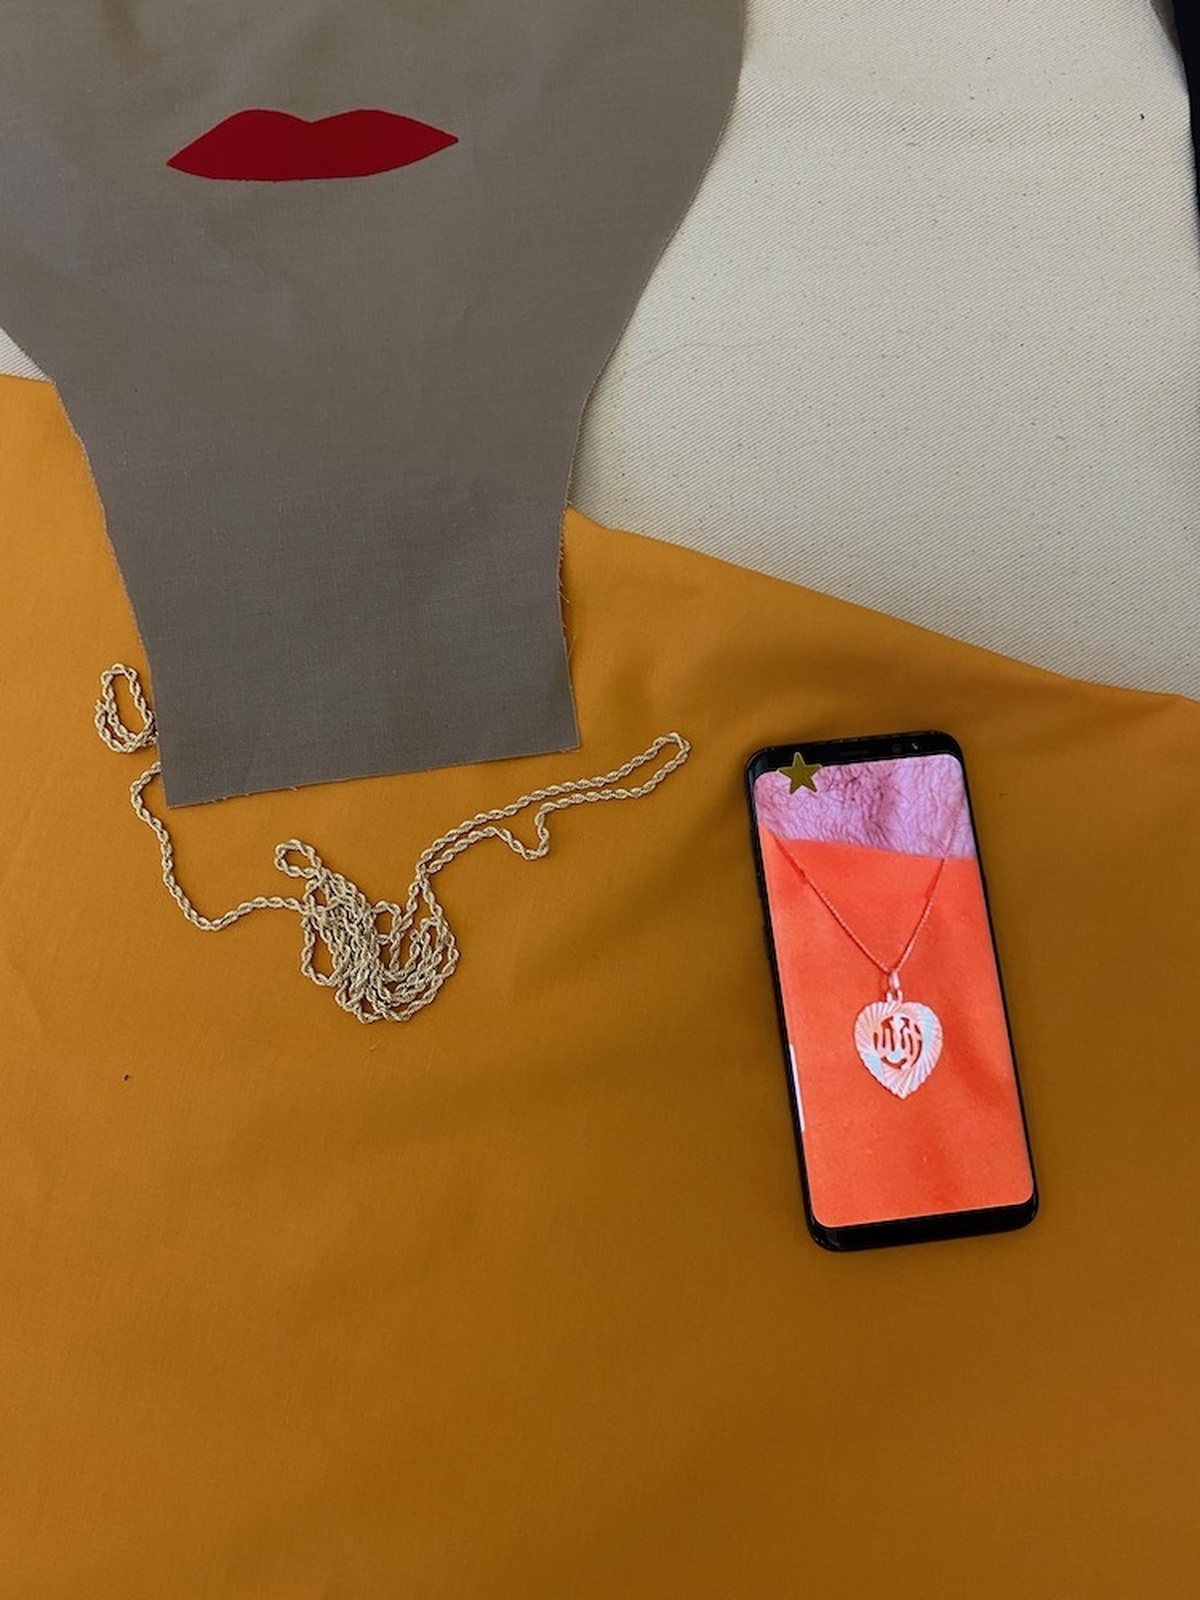 A close up of the header image with a phone with a pendant on it.